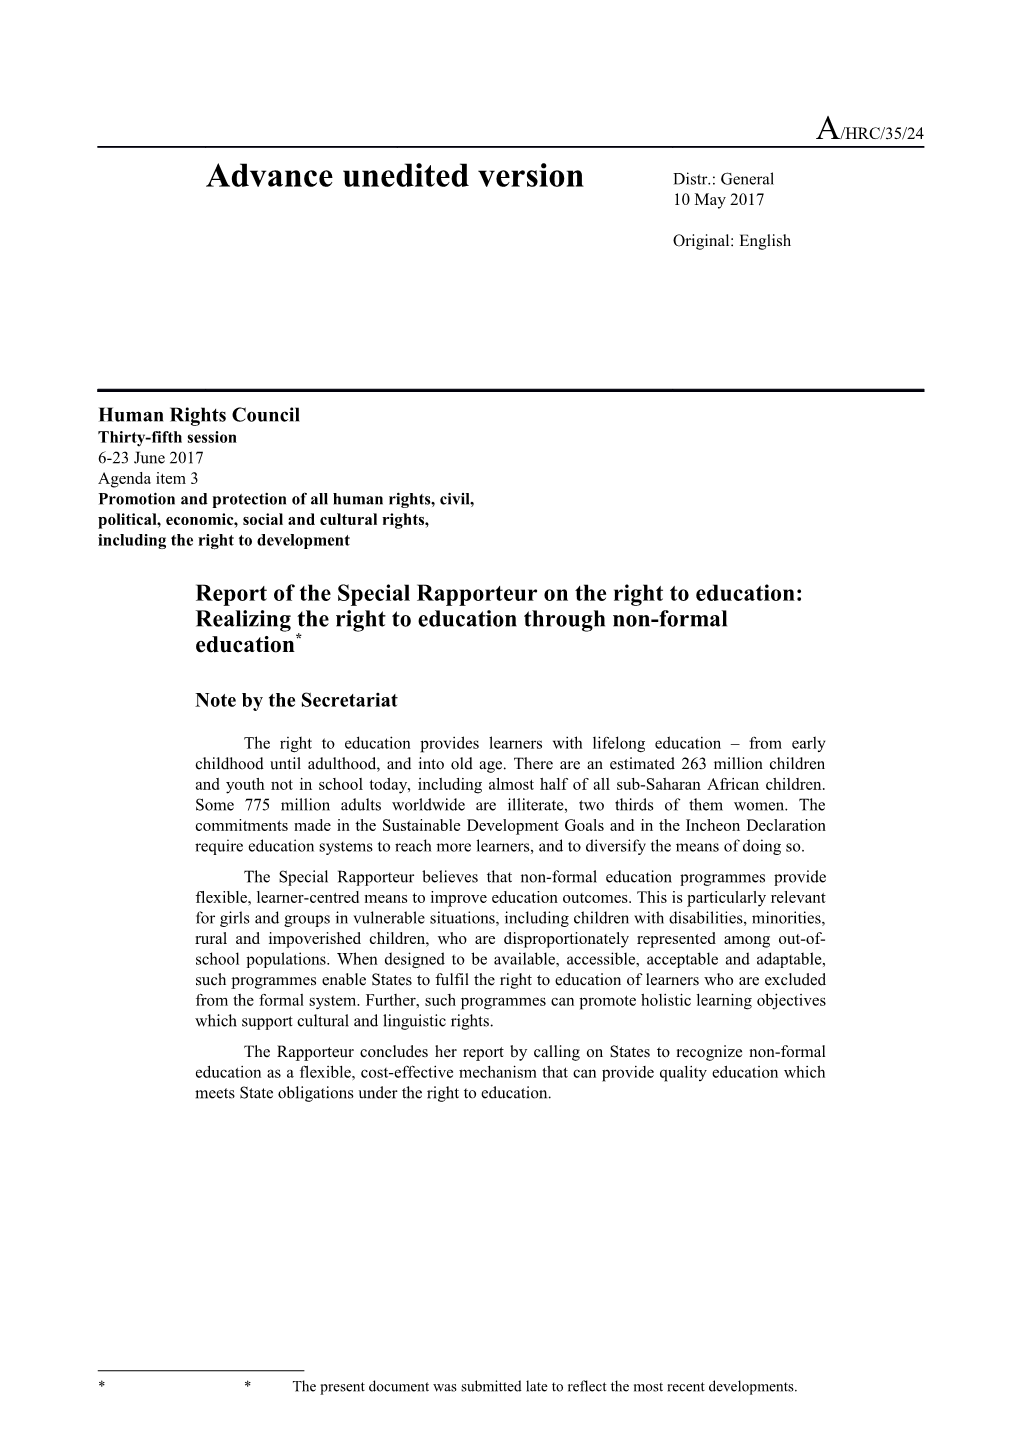 Report of the Special Rapporteur on the Right to Education in English